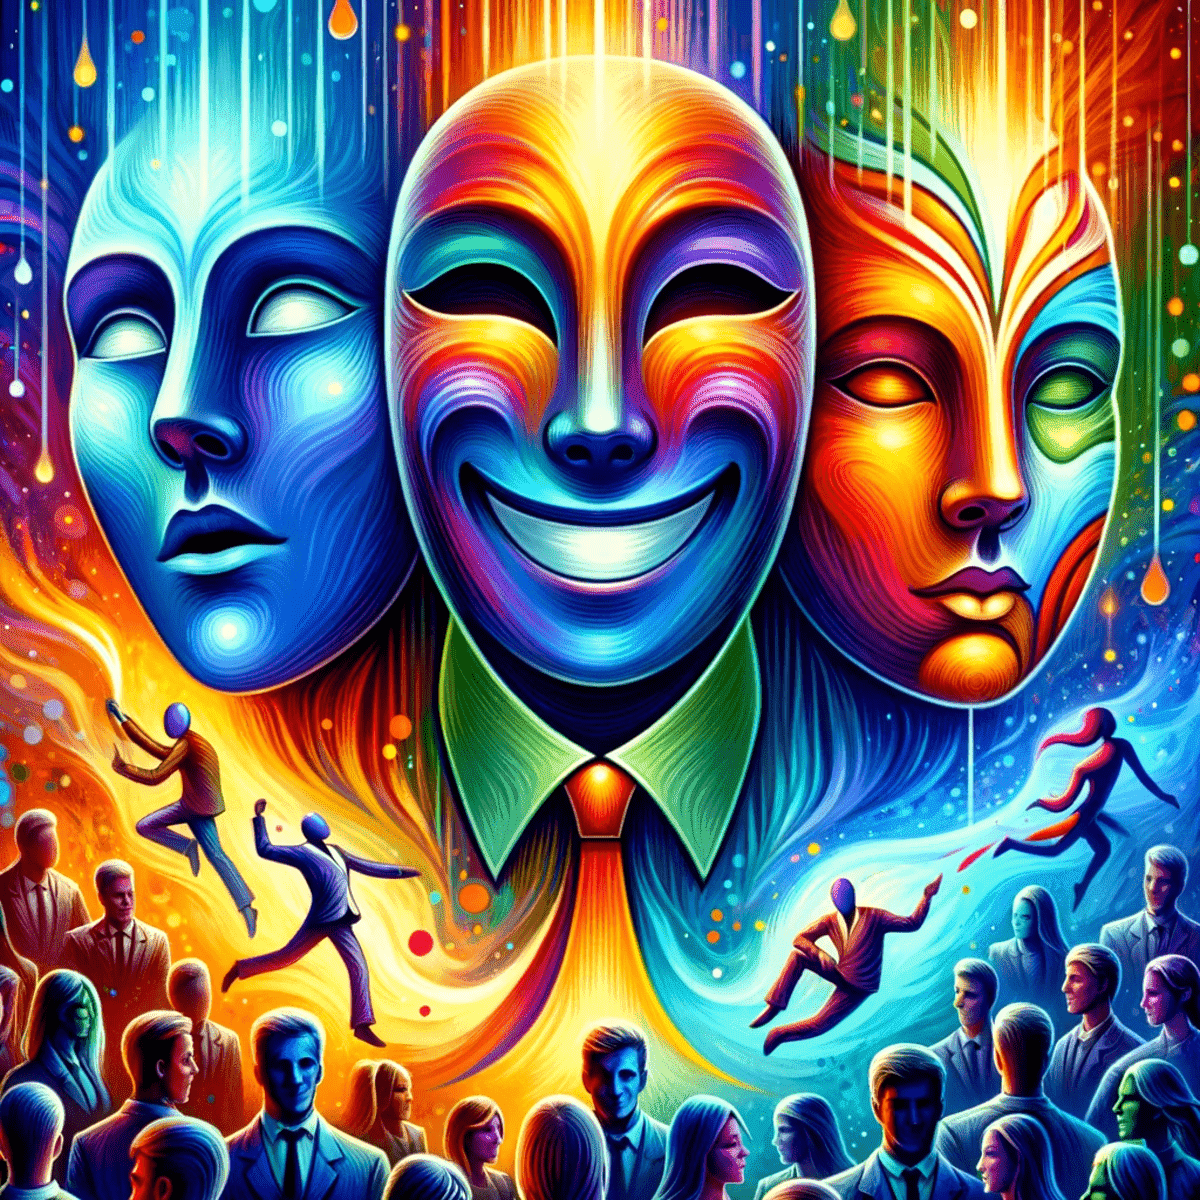 three-masks-each-floating-above-a-diverse-crowd-of-people-and-reflecting-specific-emotional-states-of-authentic-self